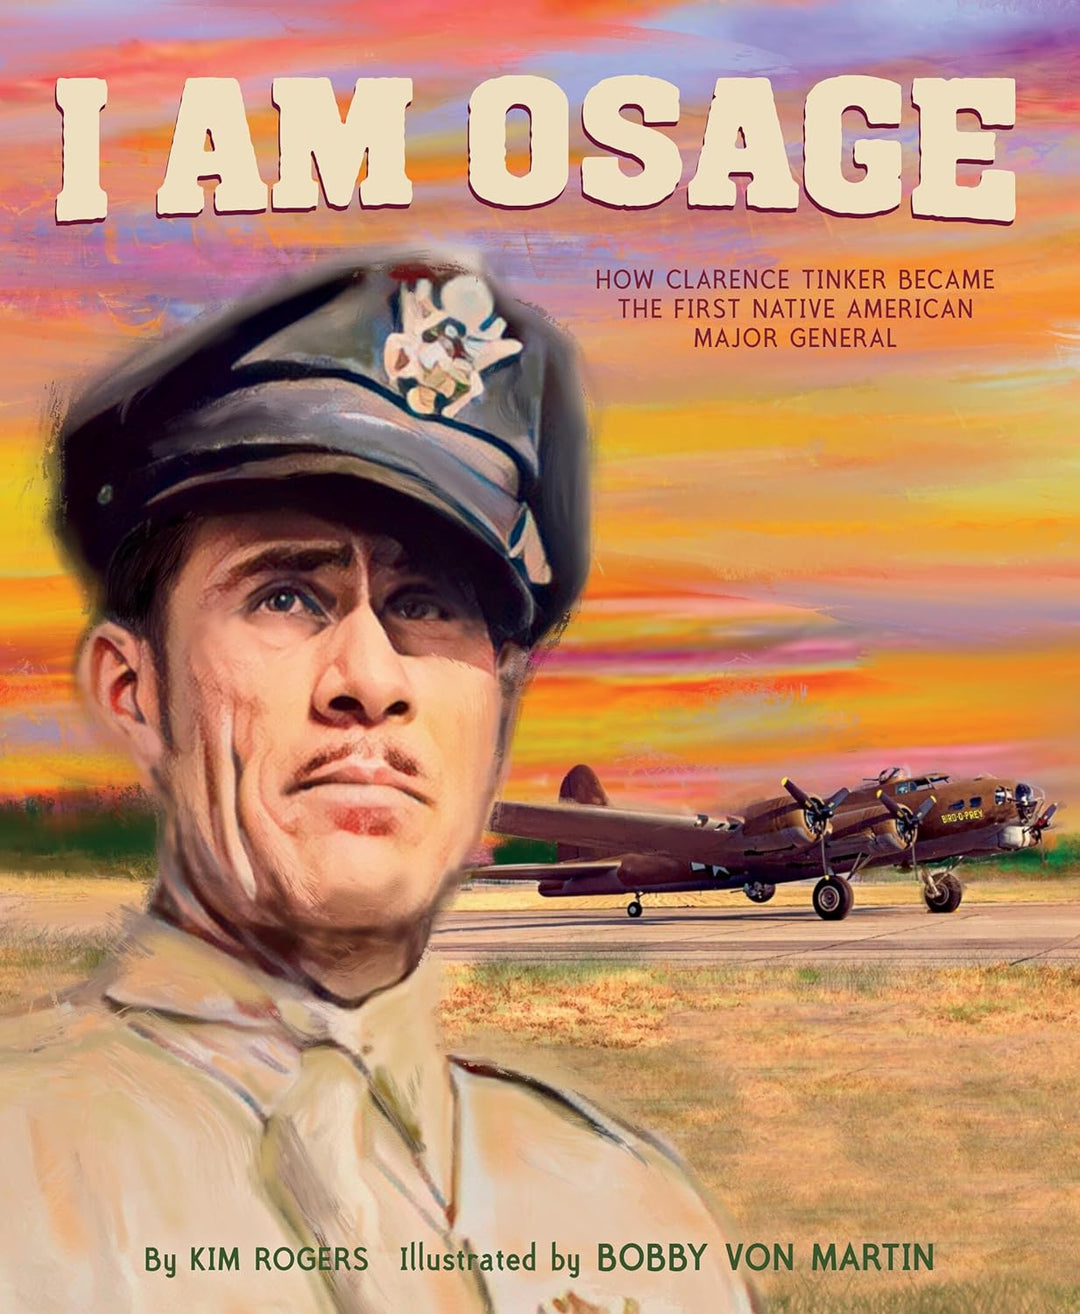 I Am Osage: How Clarence Tinker Became the First Native American Major General by Kim Rogers